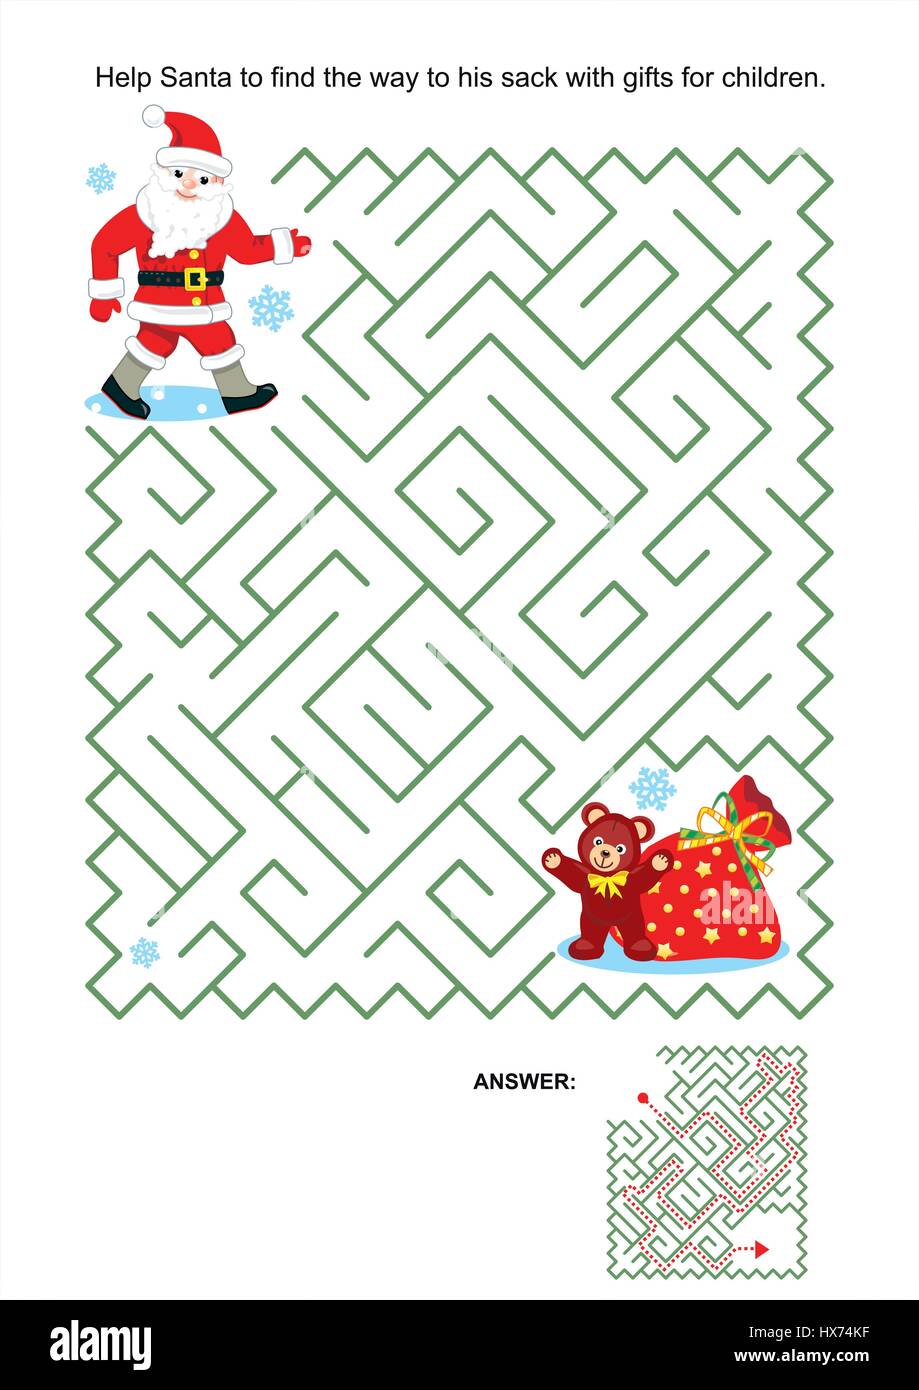 Maze game or activity page for kids: Help Santa to find the way to his sack with gifts for children. Answer included. Stock Vector